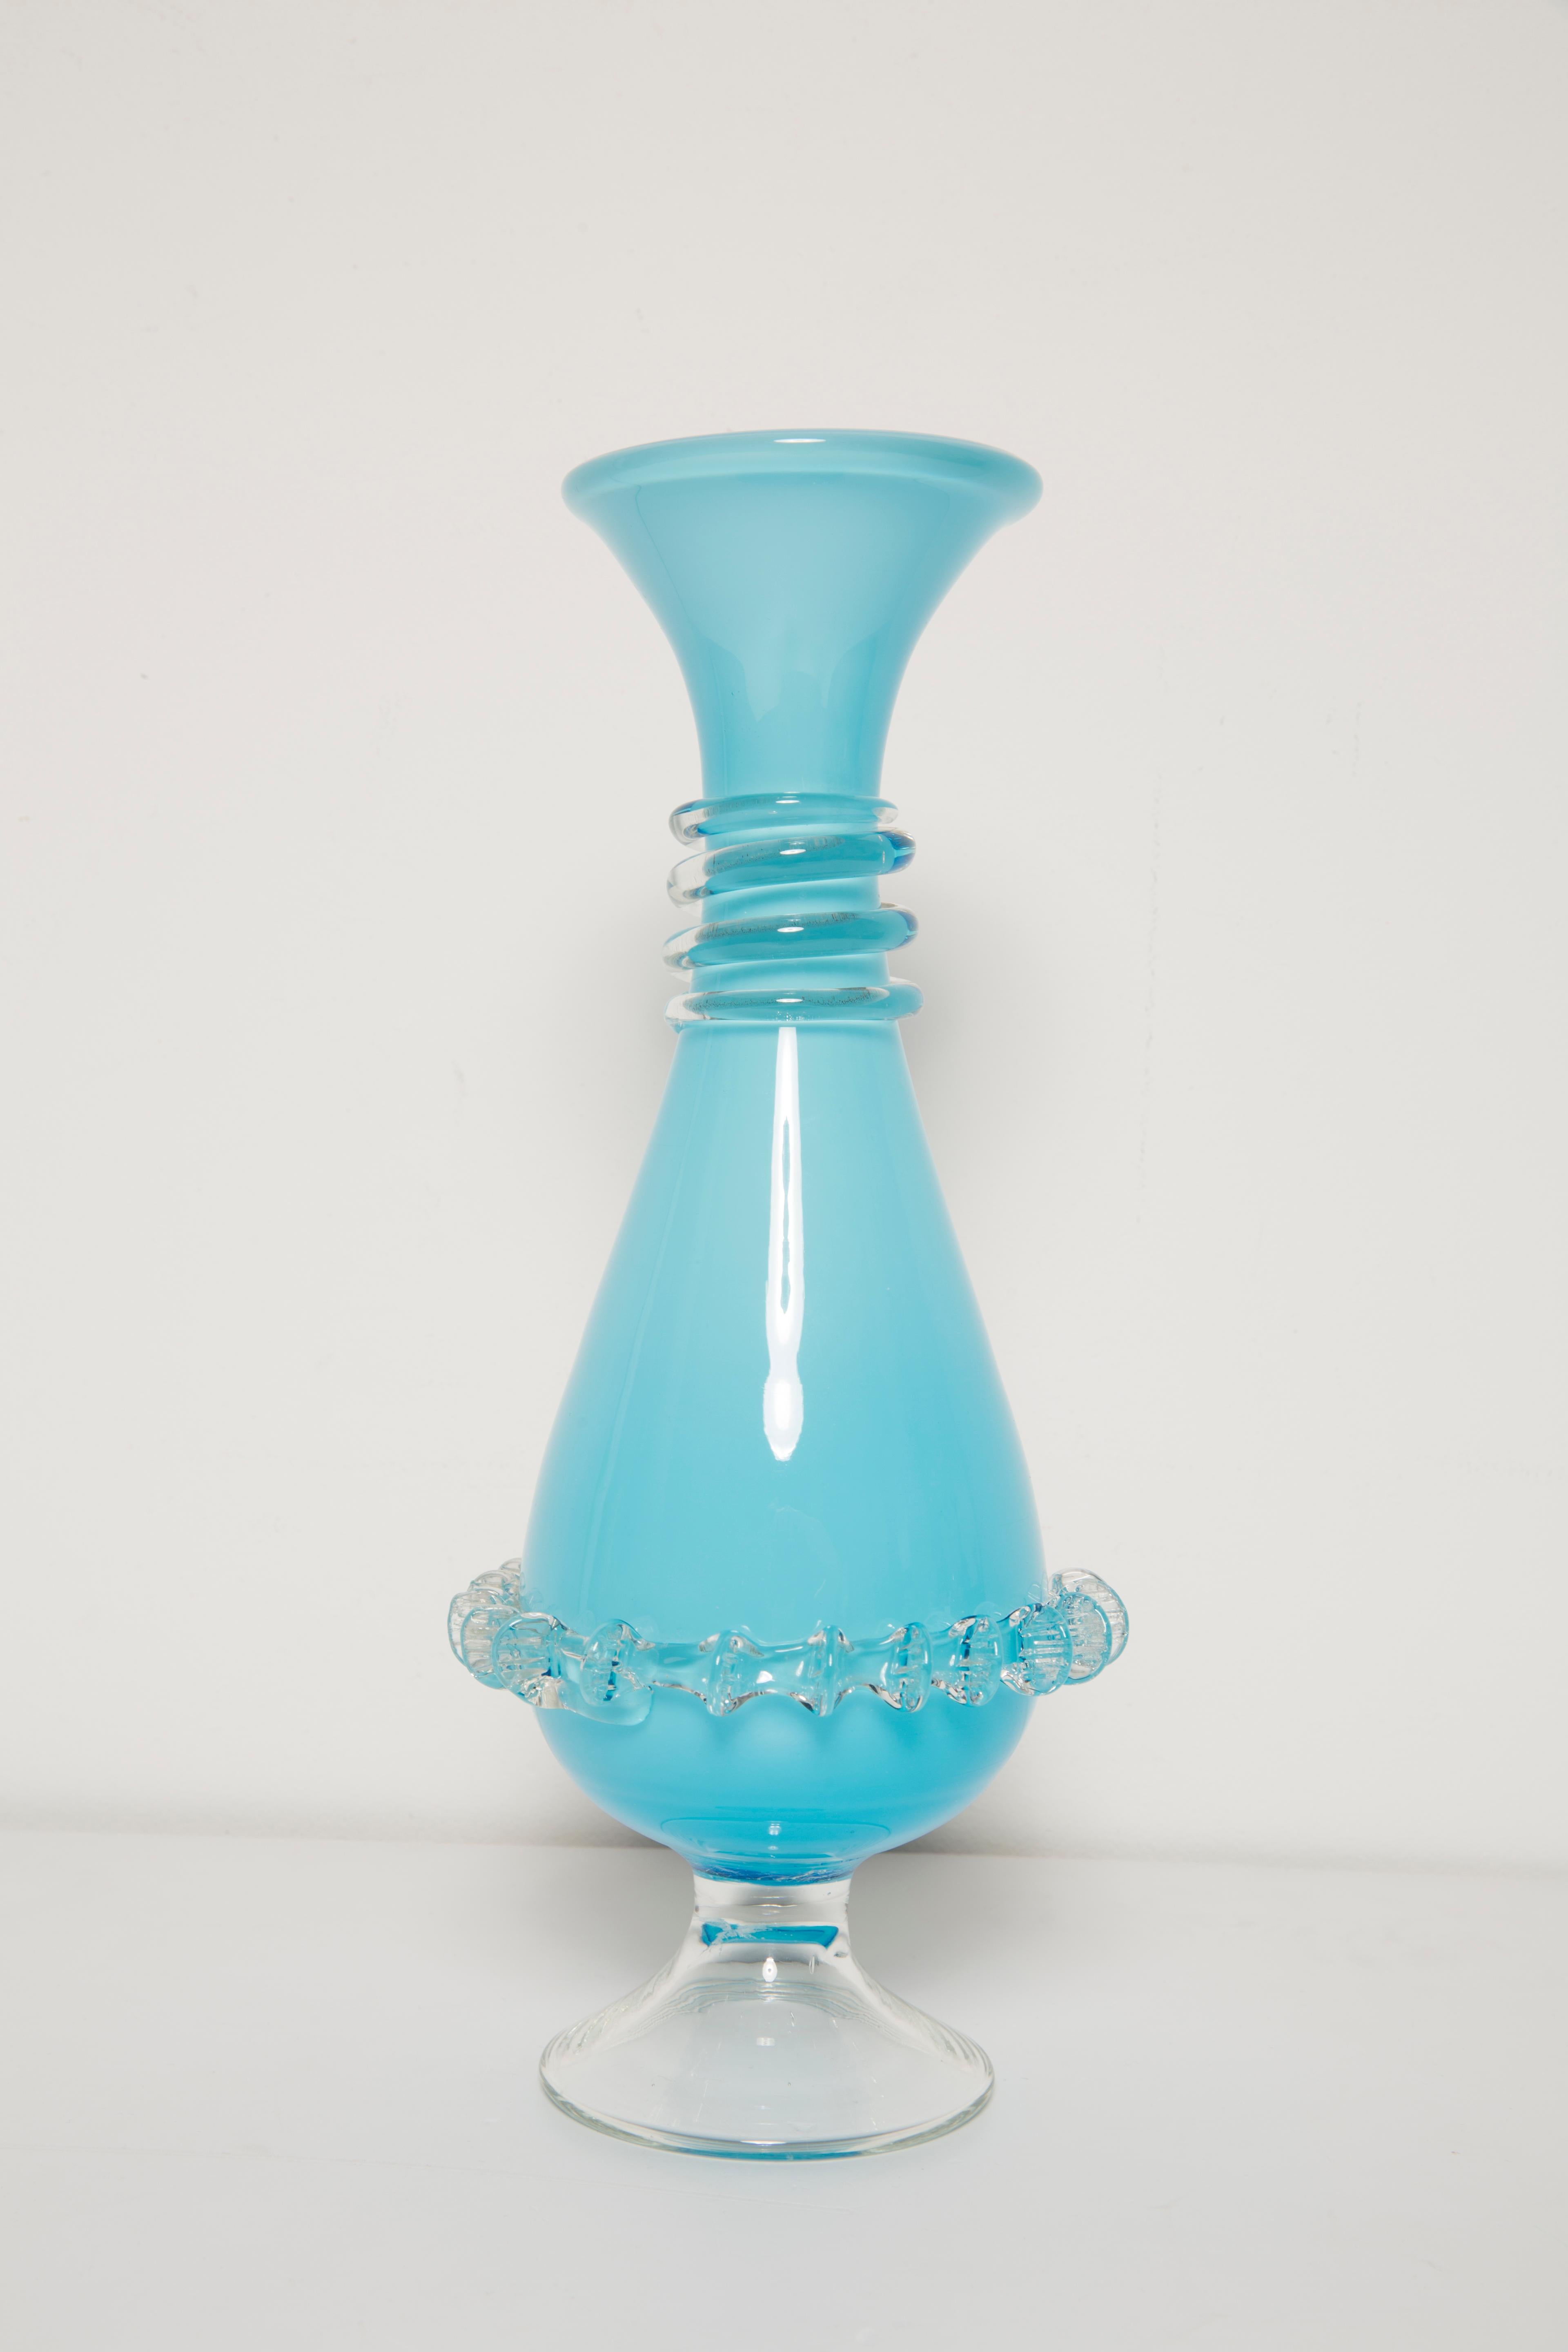 Medium Mid Century Baby Blue Vase with Frill, Europe, 1960s For Sale 1